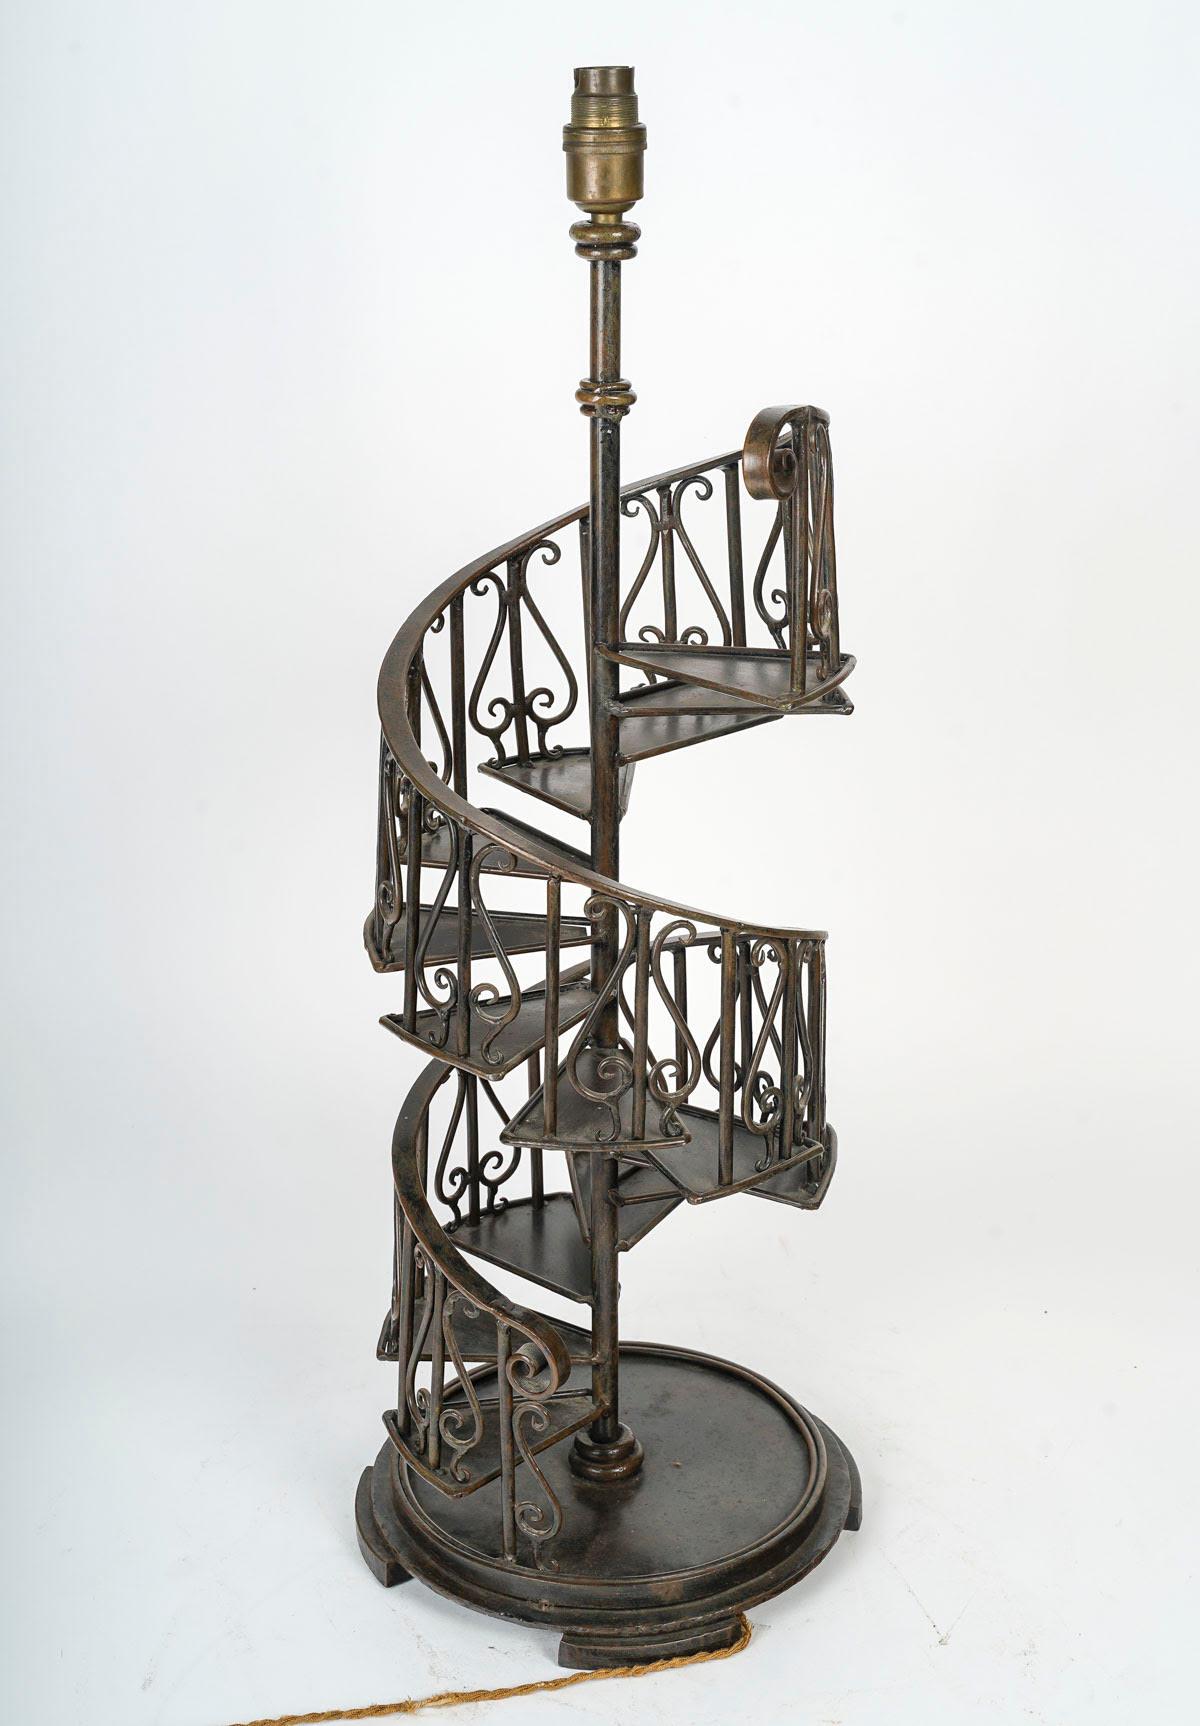 Napoleon III Spiral Staircase Table Lamp in Brown Patinated Metal, 20th Century. For Sale